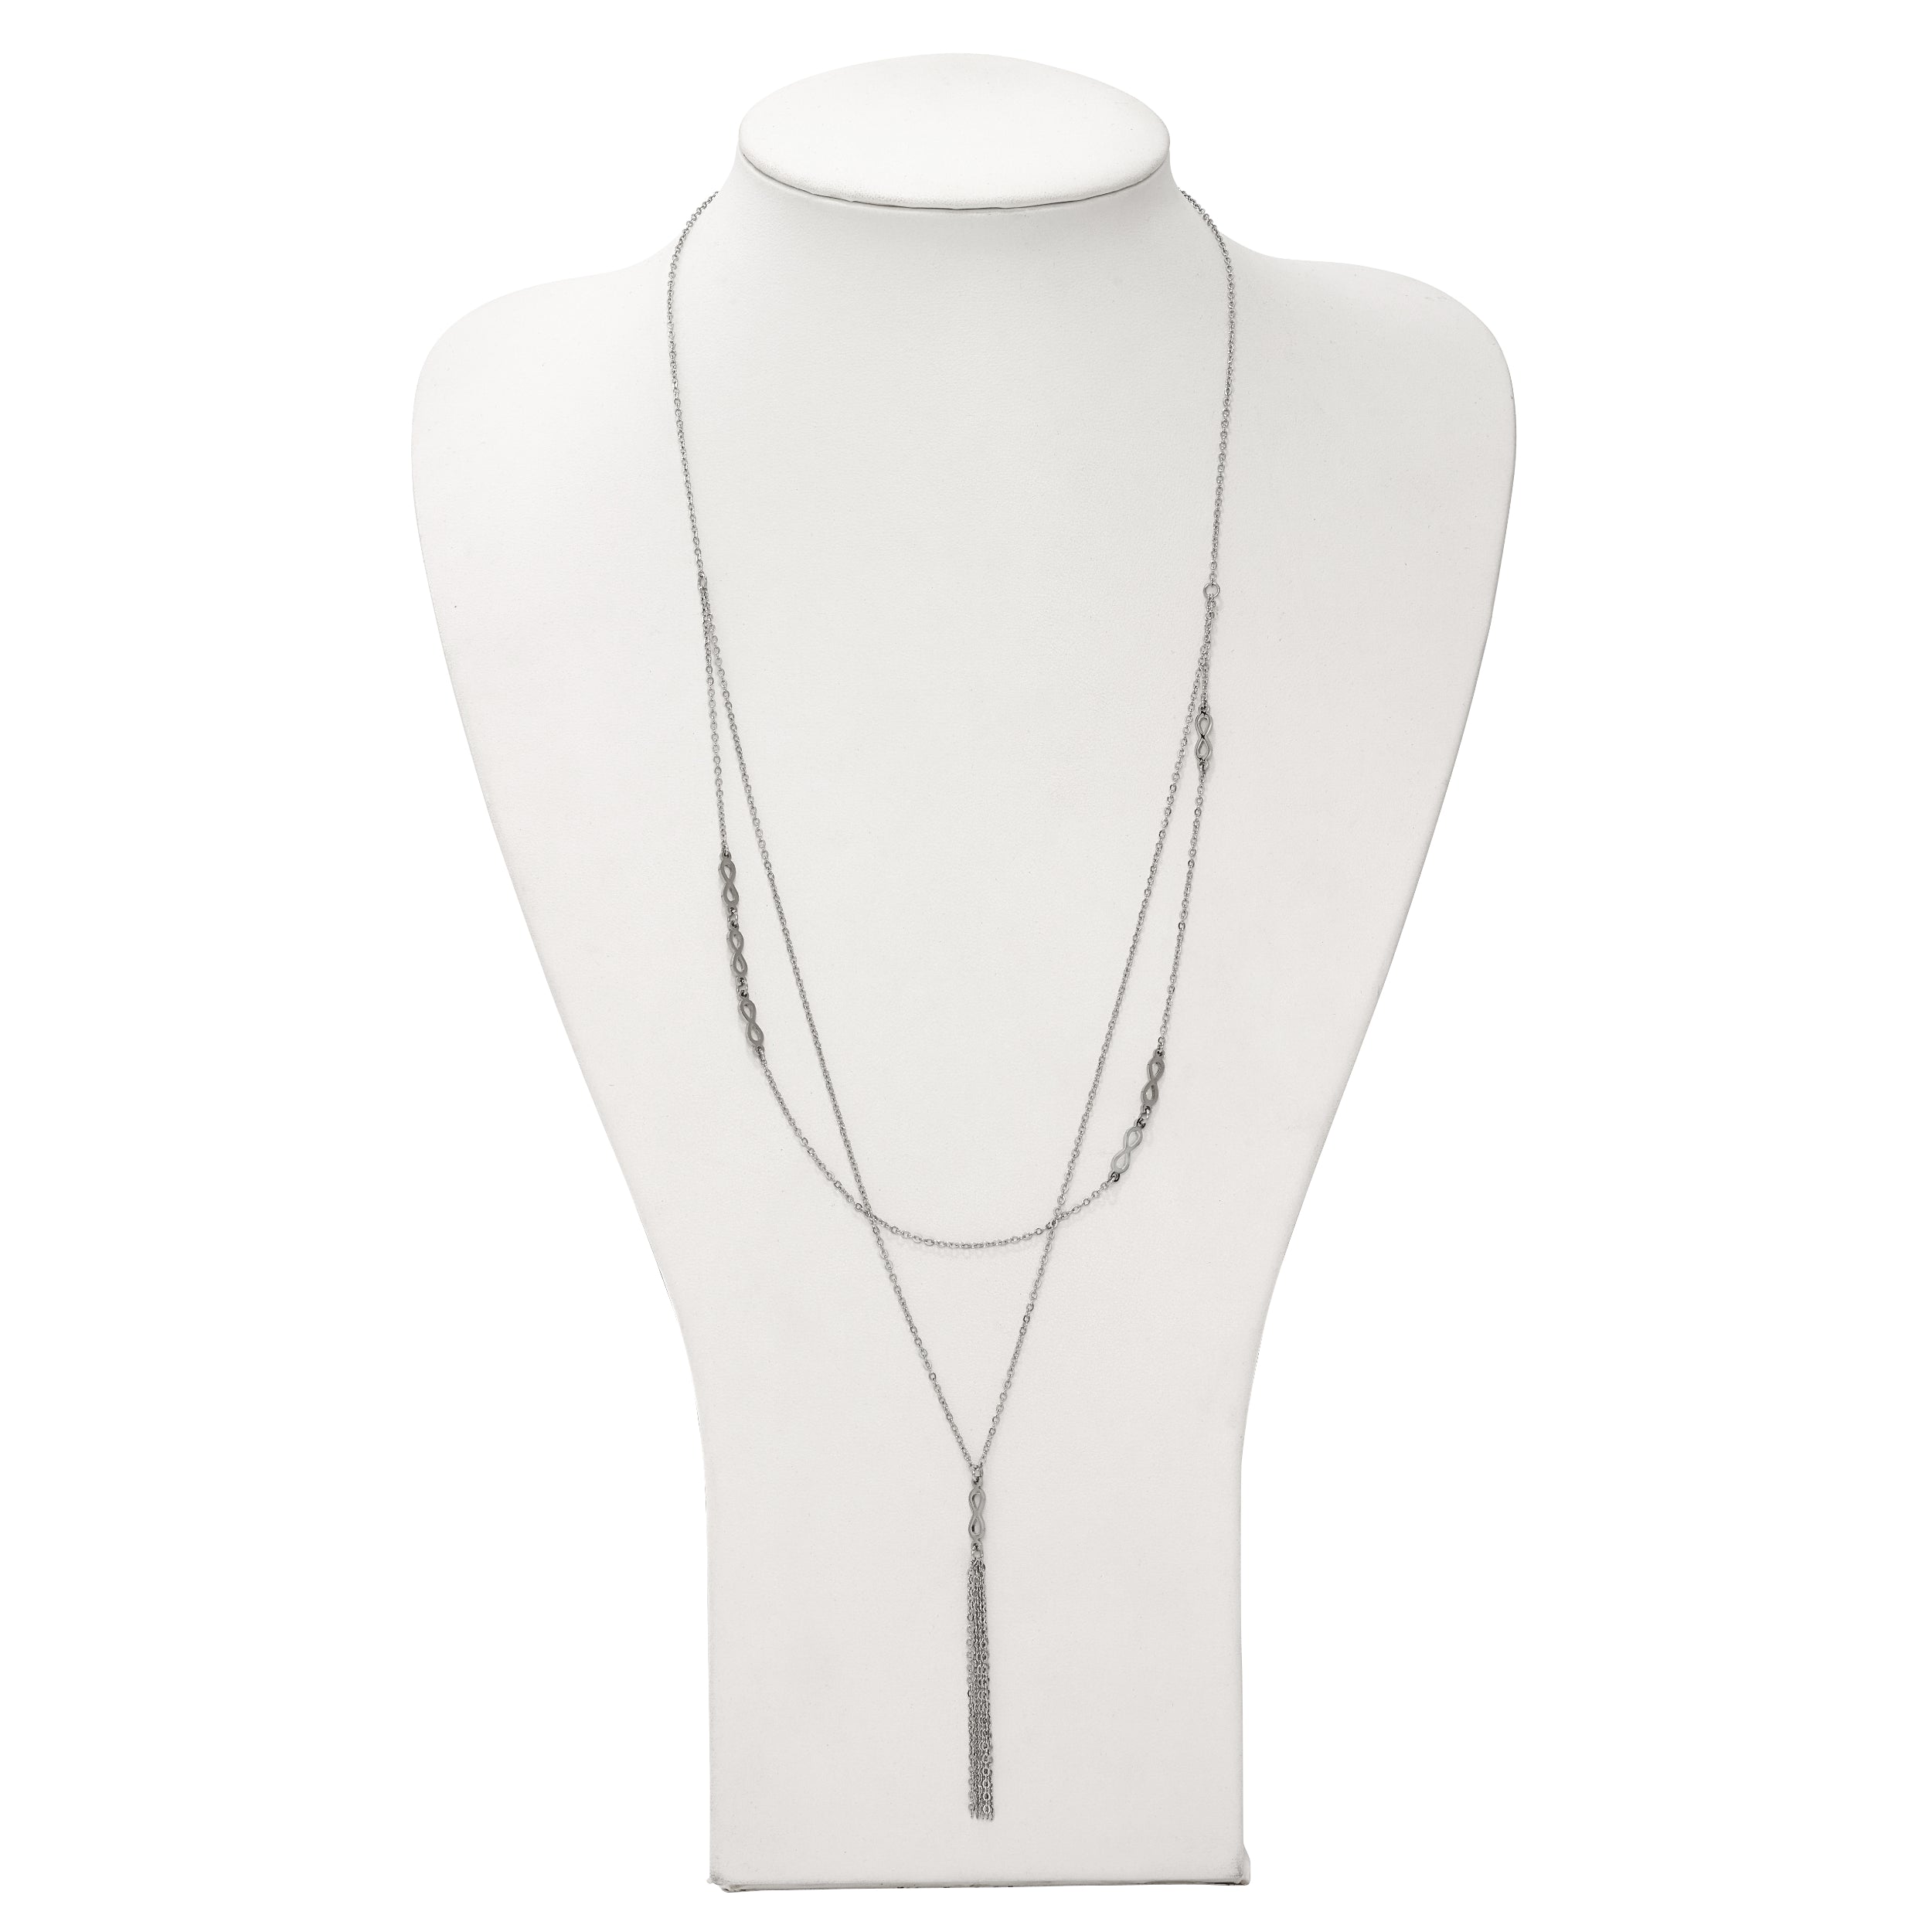 Chisel Stainless Steel Polished Infinity Multi Strand 28 inch with a 2 inch Extension Necklace